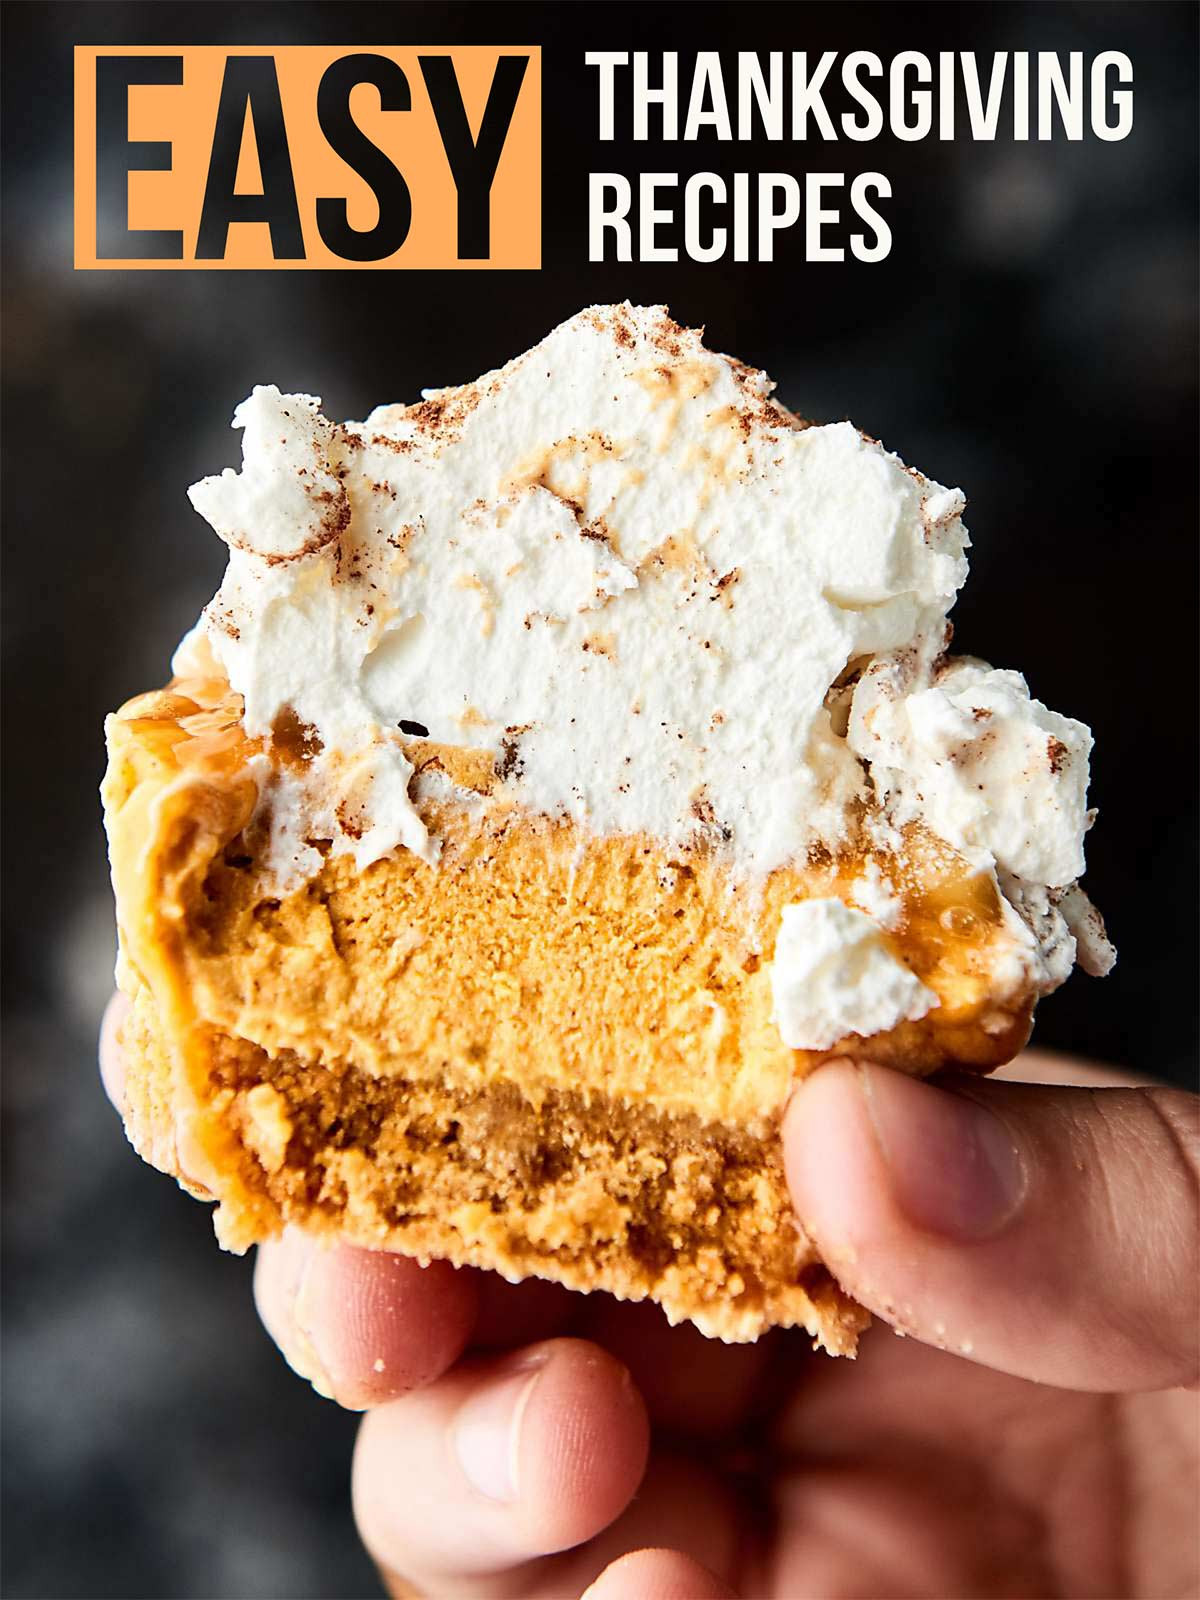 Festive Thanksgiving Desserts
 Easy Thanksgiving Recipes 2017 Show Me the Yummy